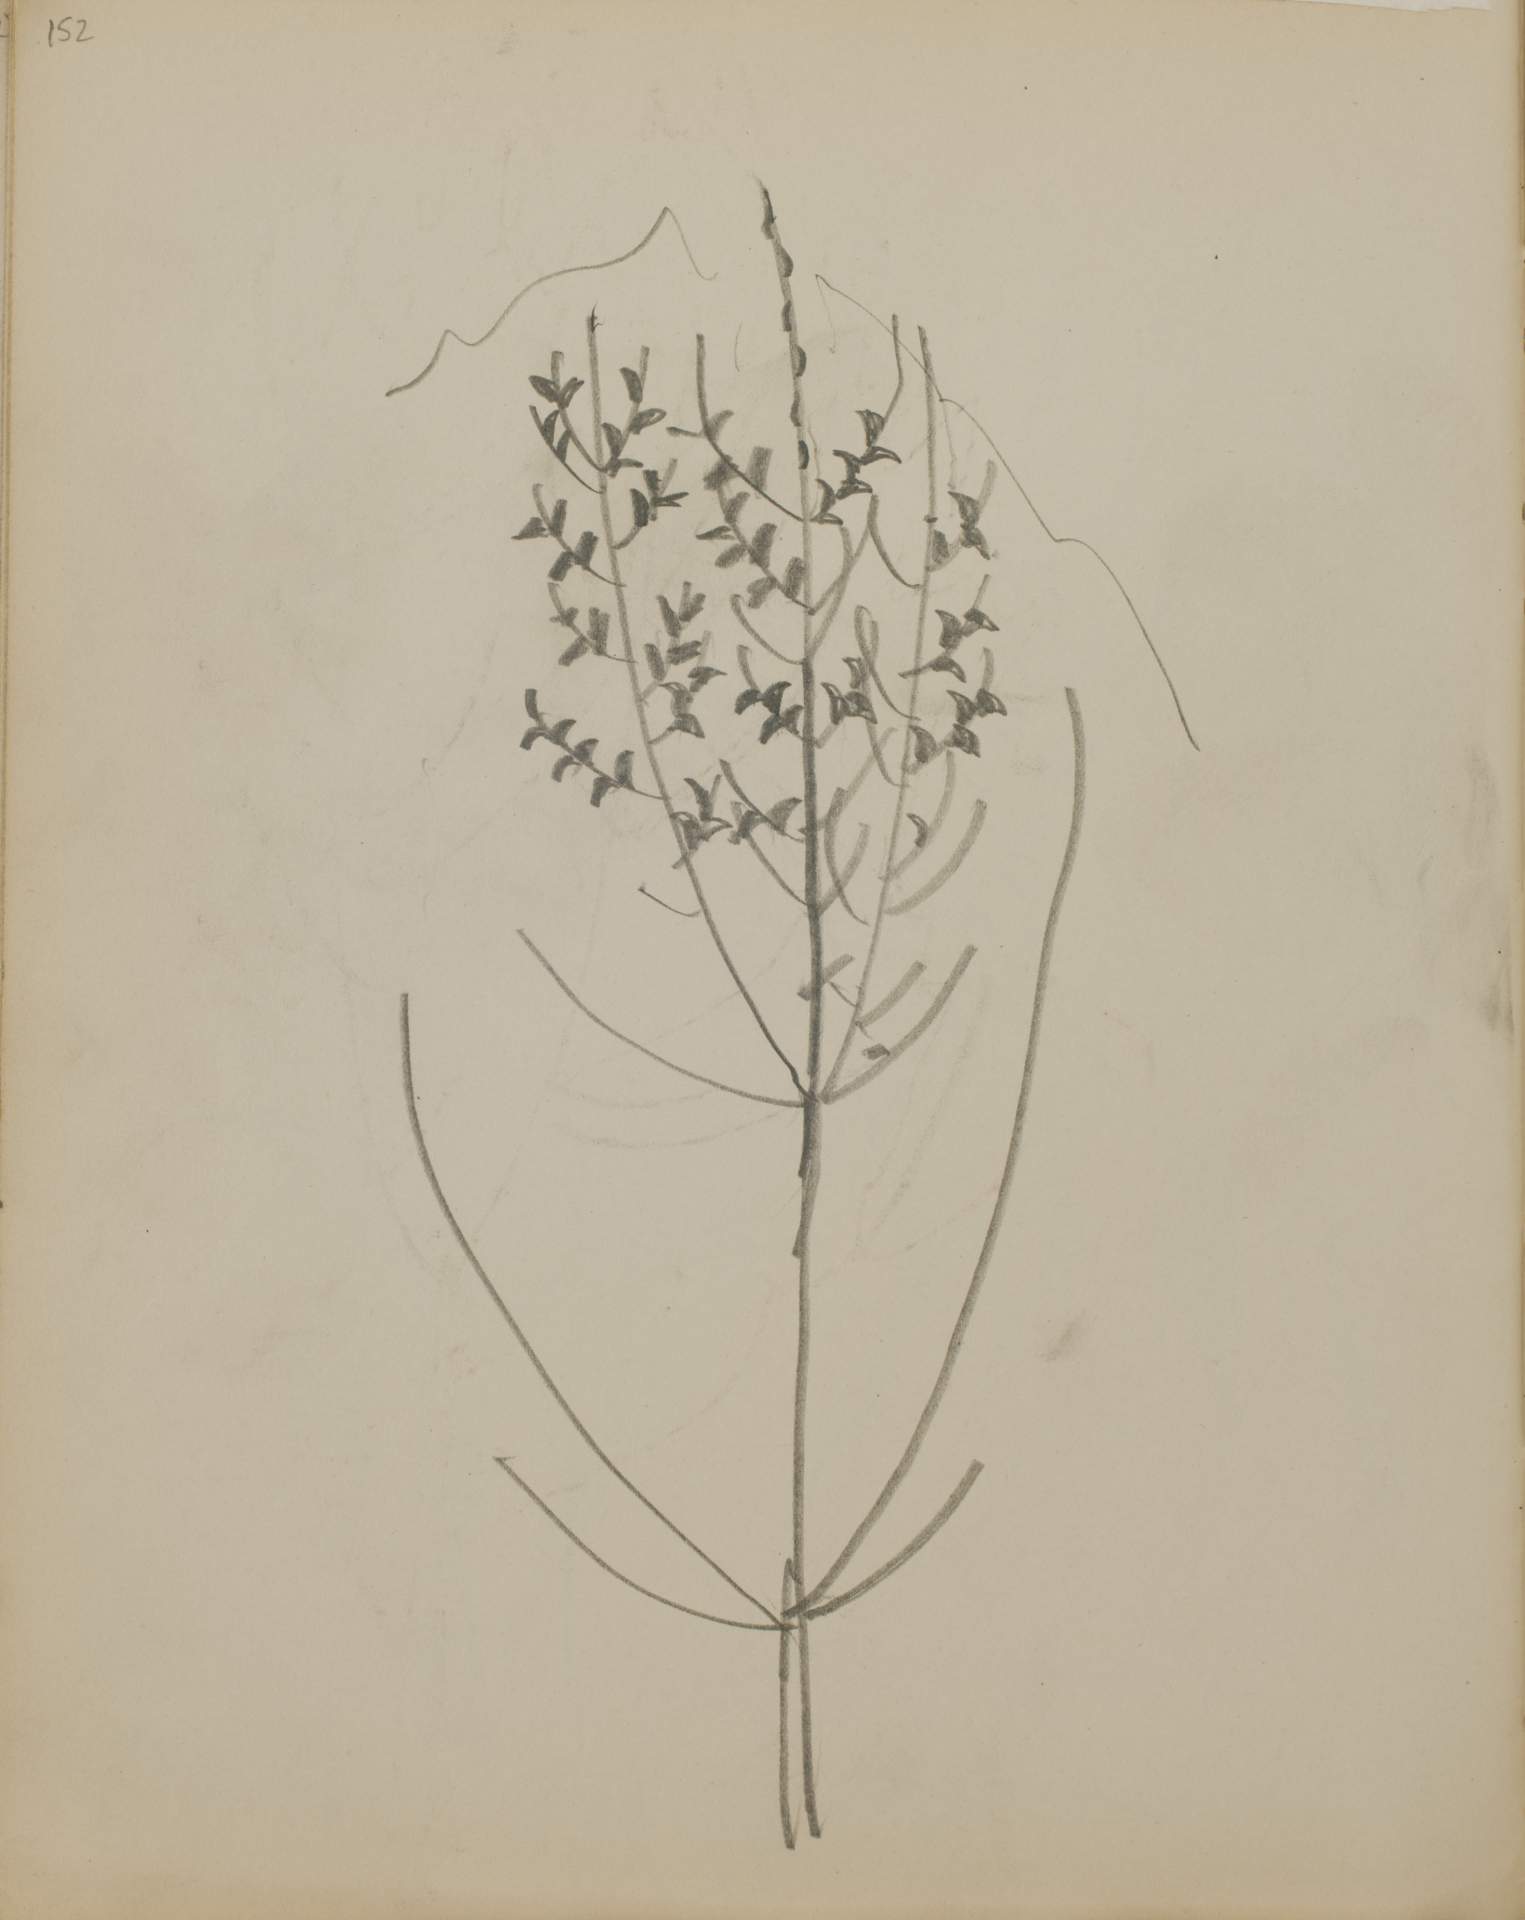 Untitled (sketch of a tree)